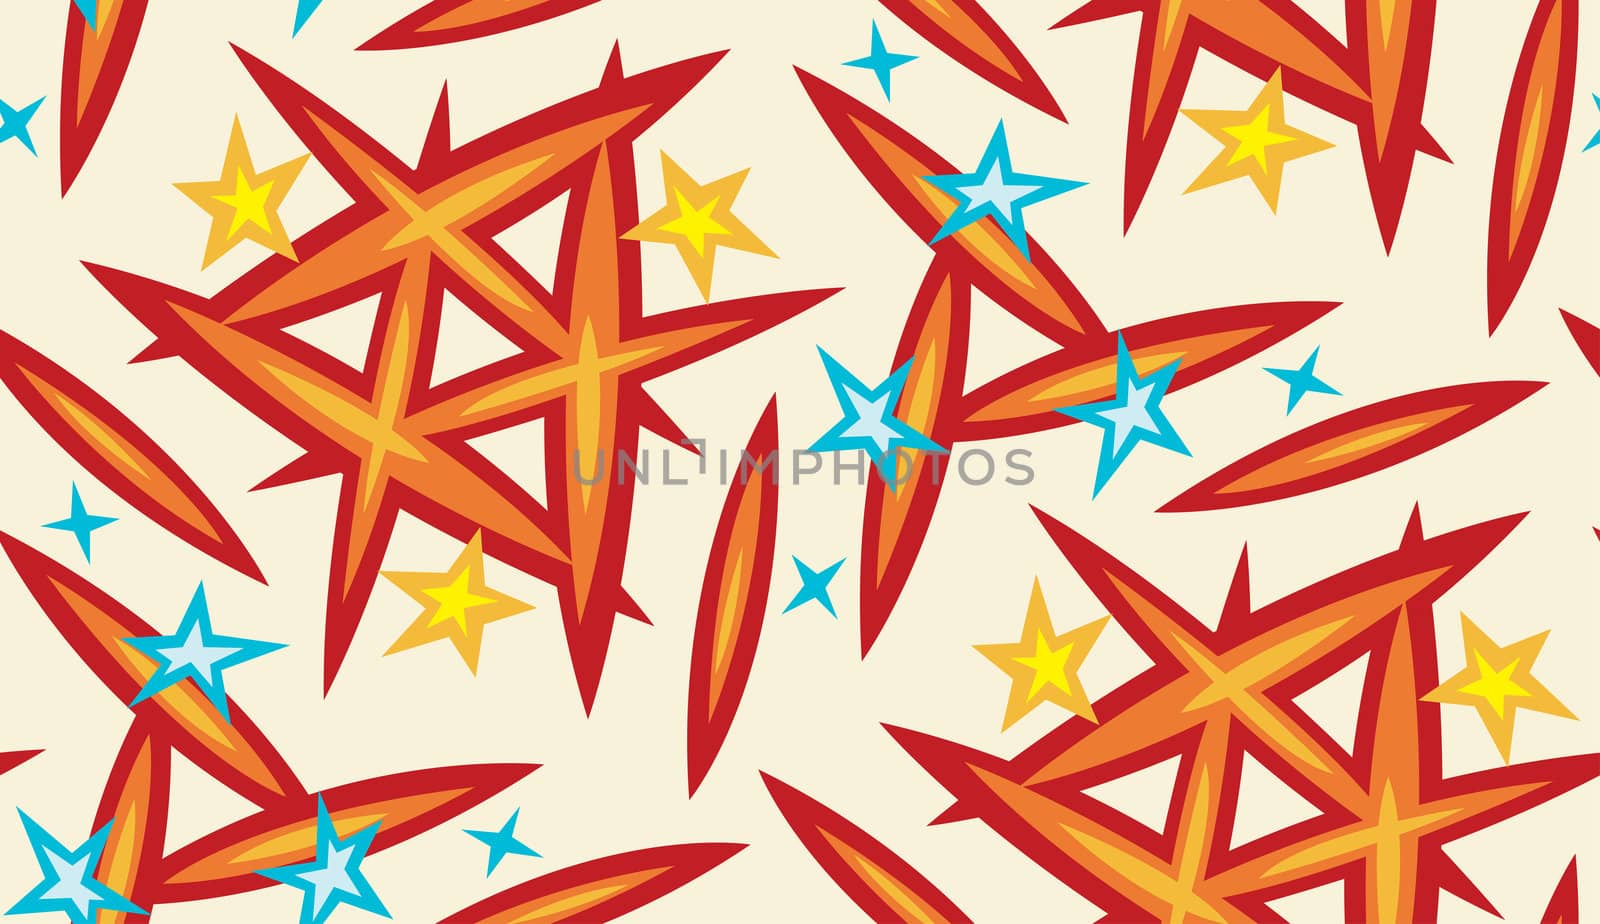 Stars and sparks inside a seamless background wallpaper pattern 